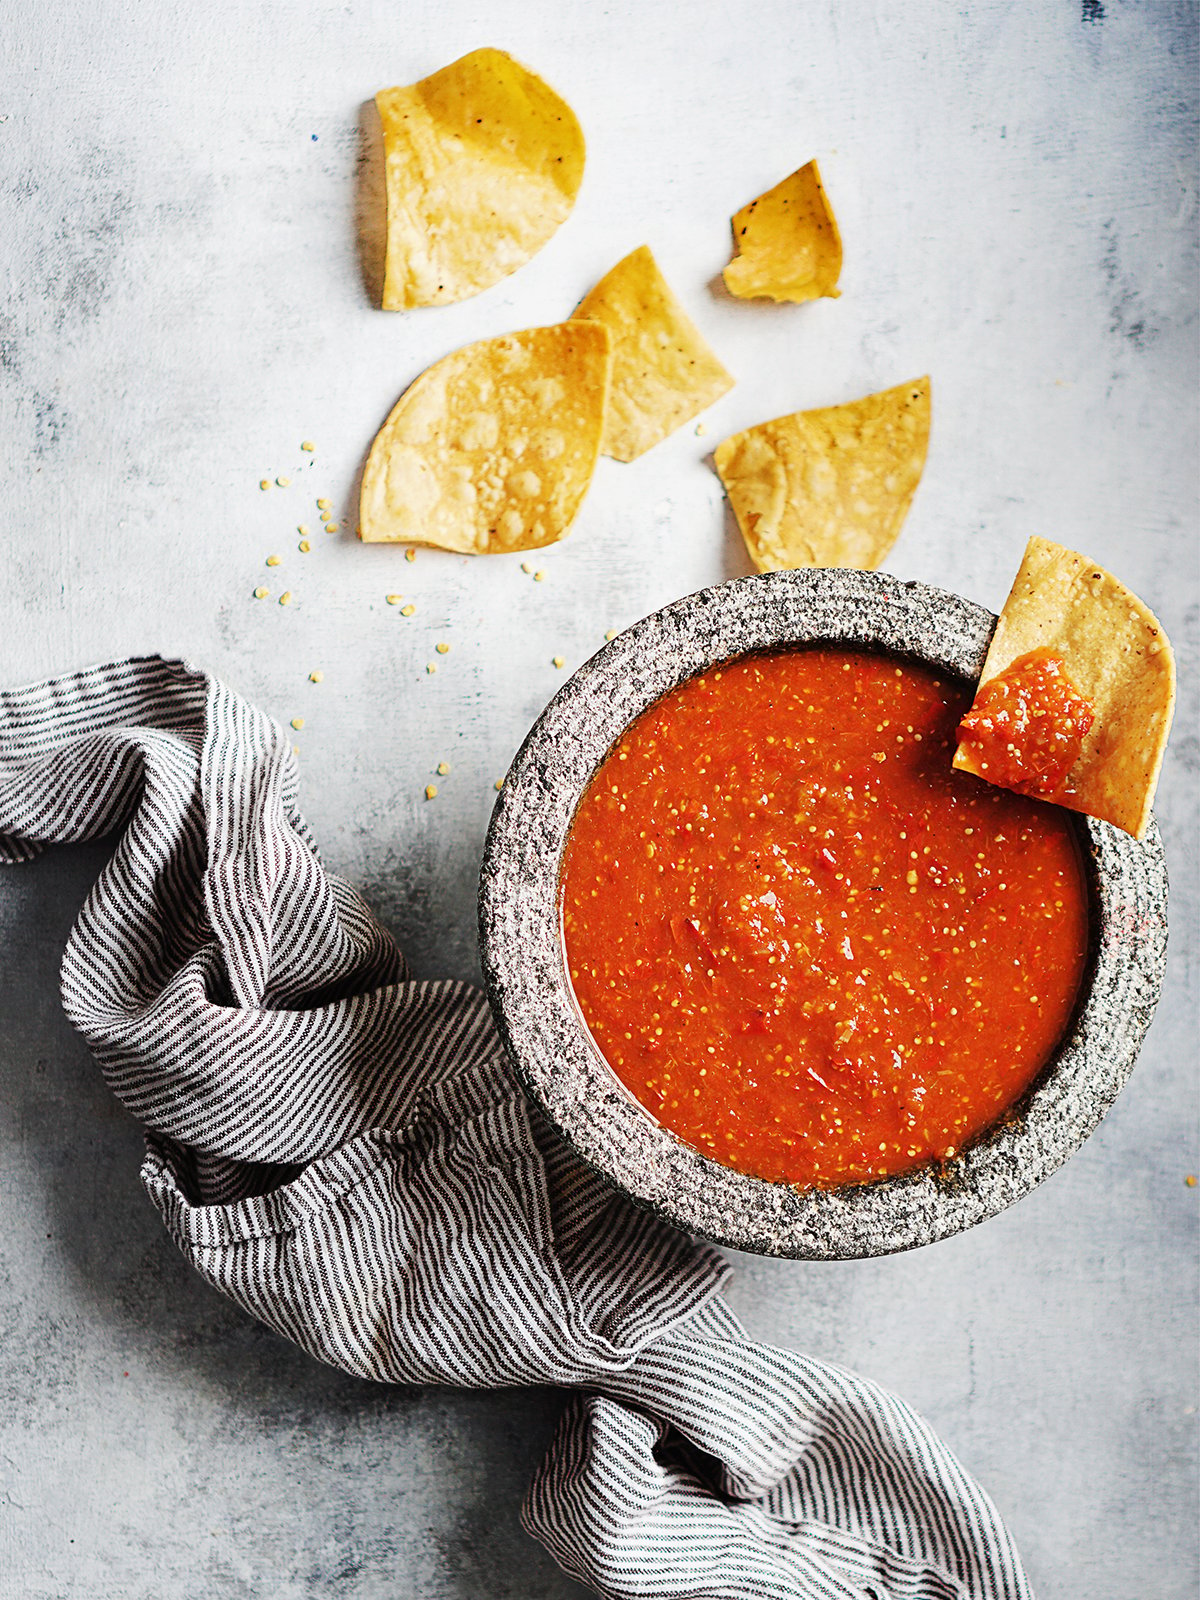 Chile De Arbol Salsa in a molcajete with a gray kitchen towel on the side